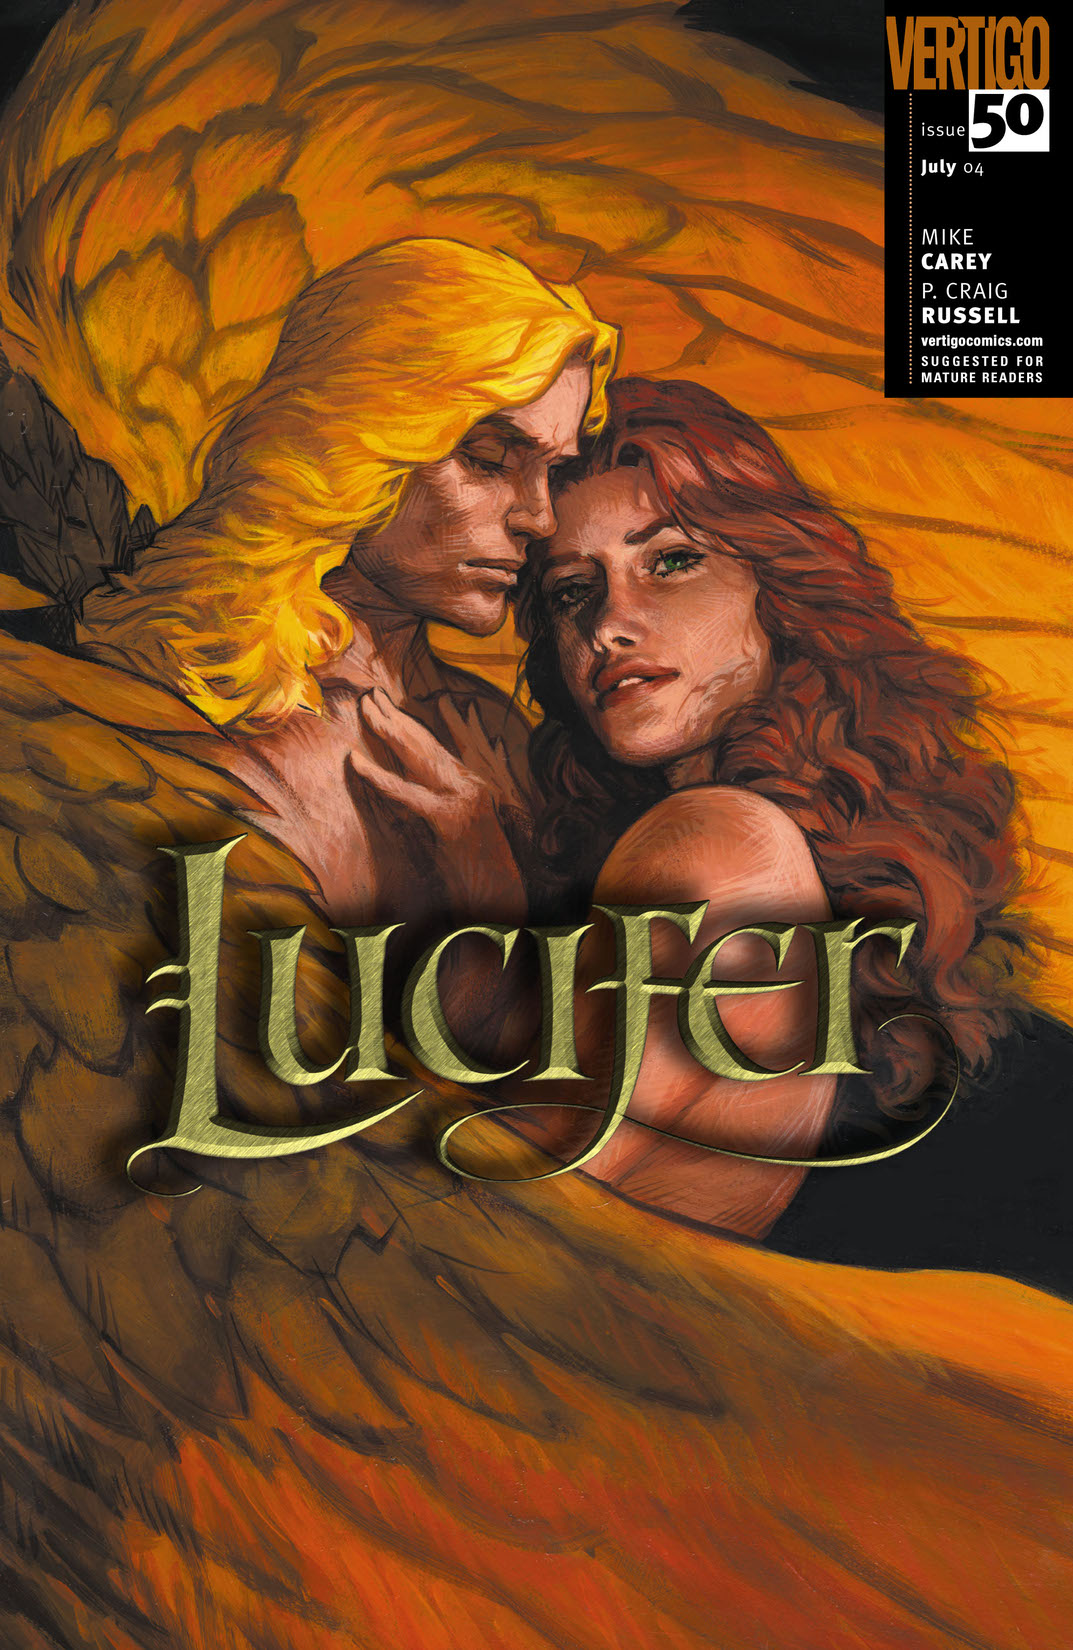 Lucifer #50 preview images